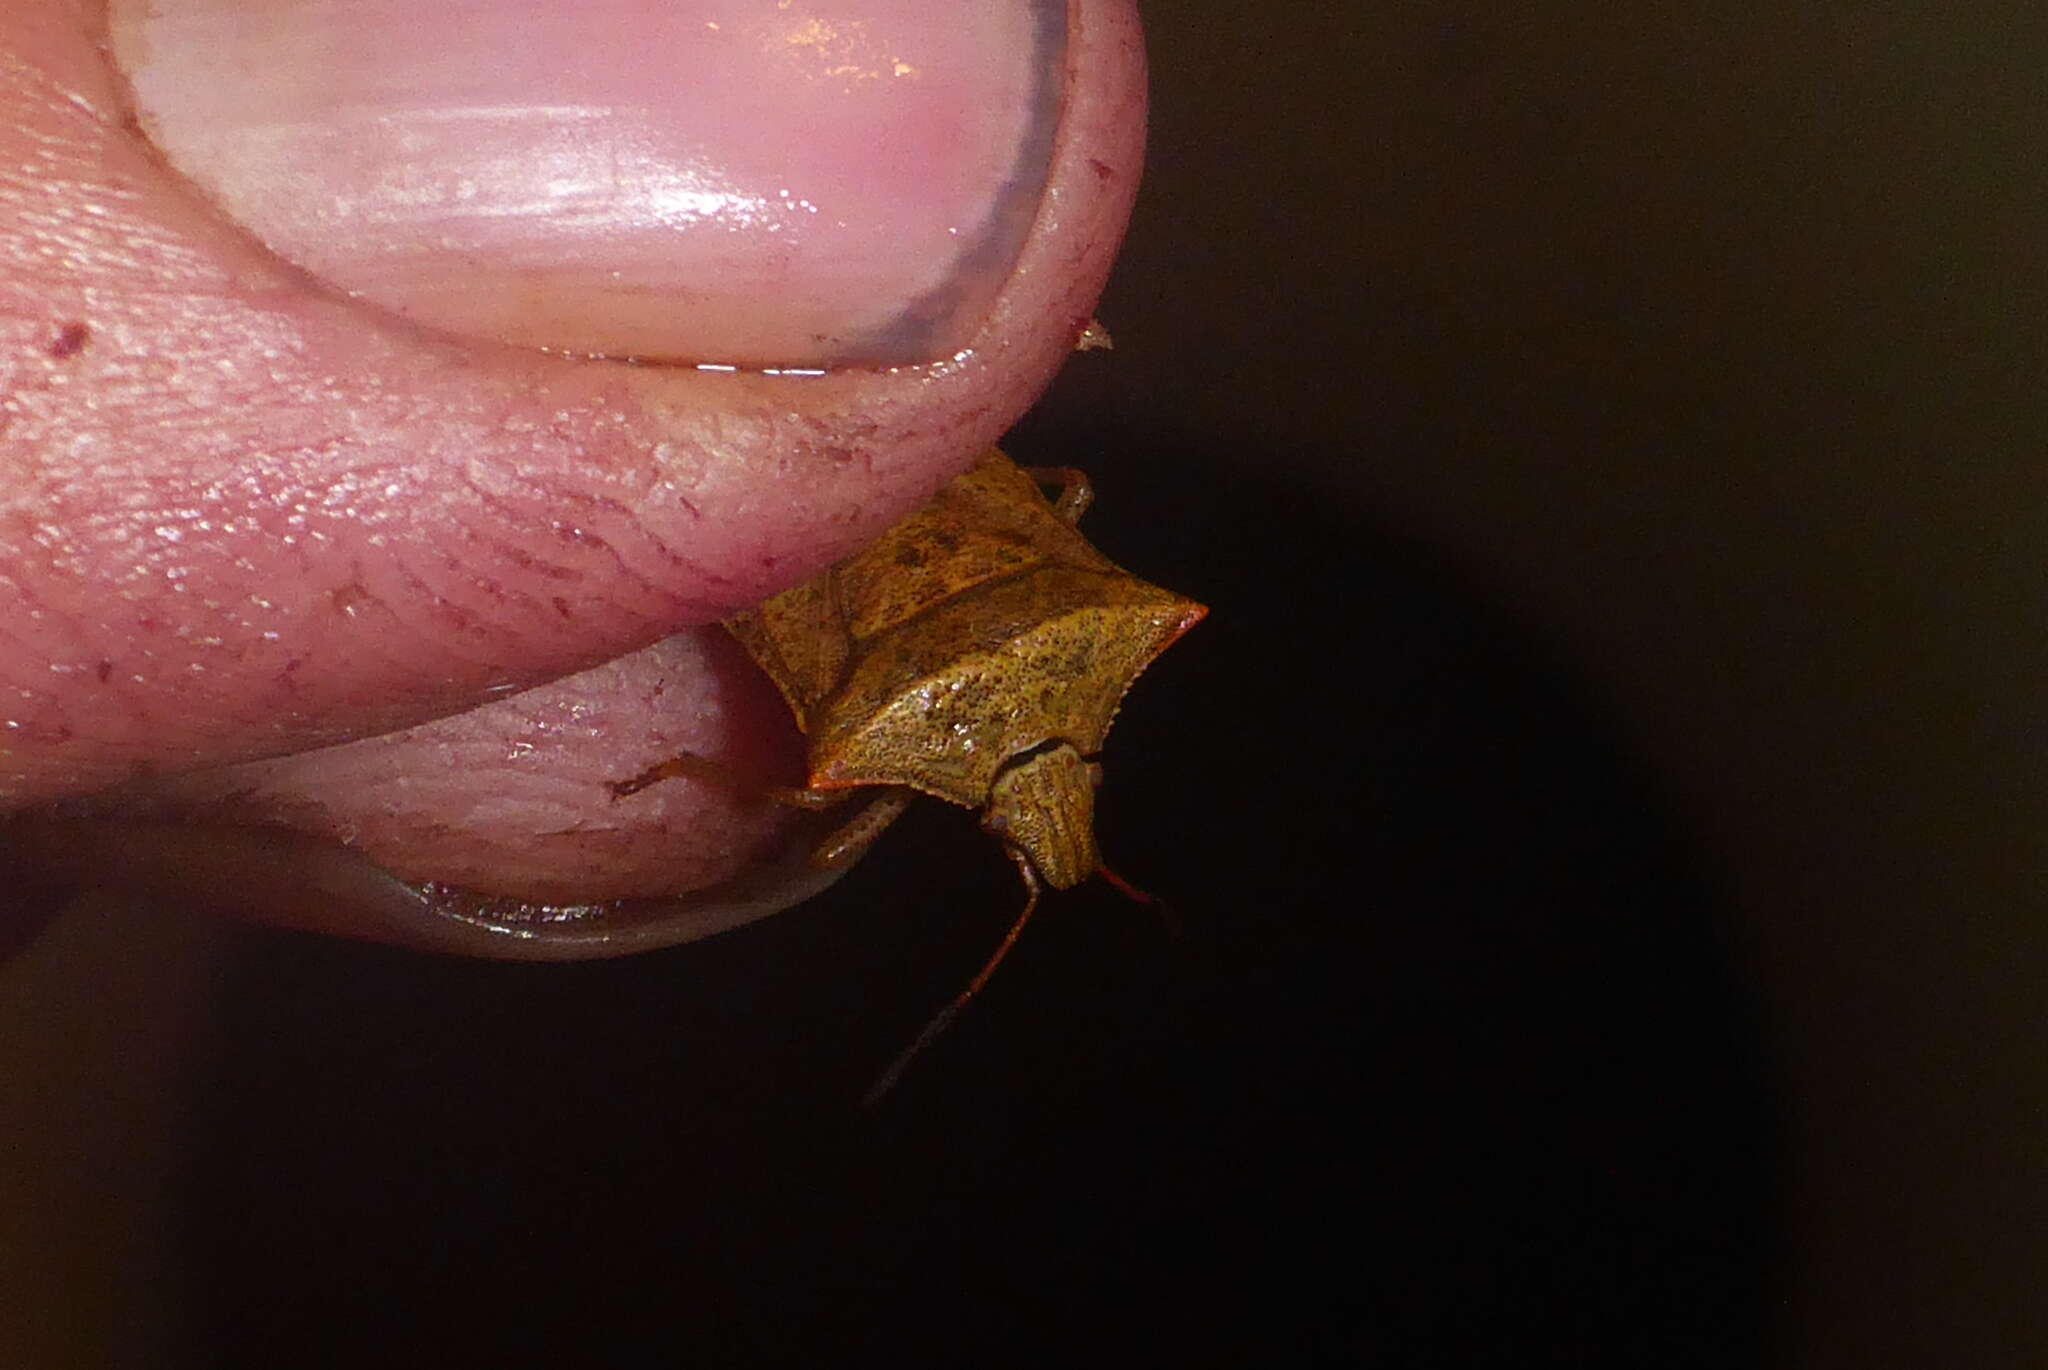 Image of One Spotted Stink Bug